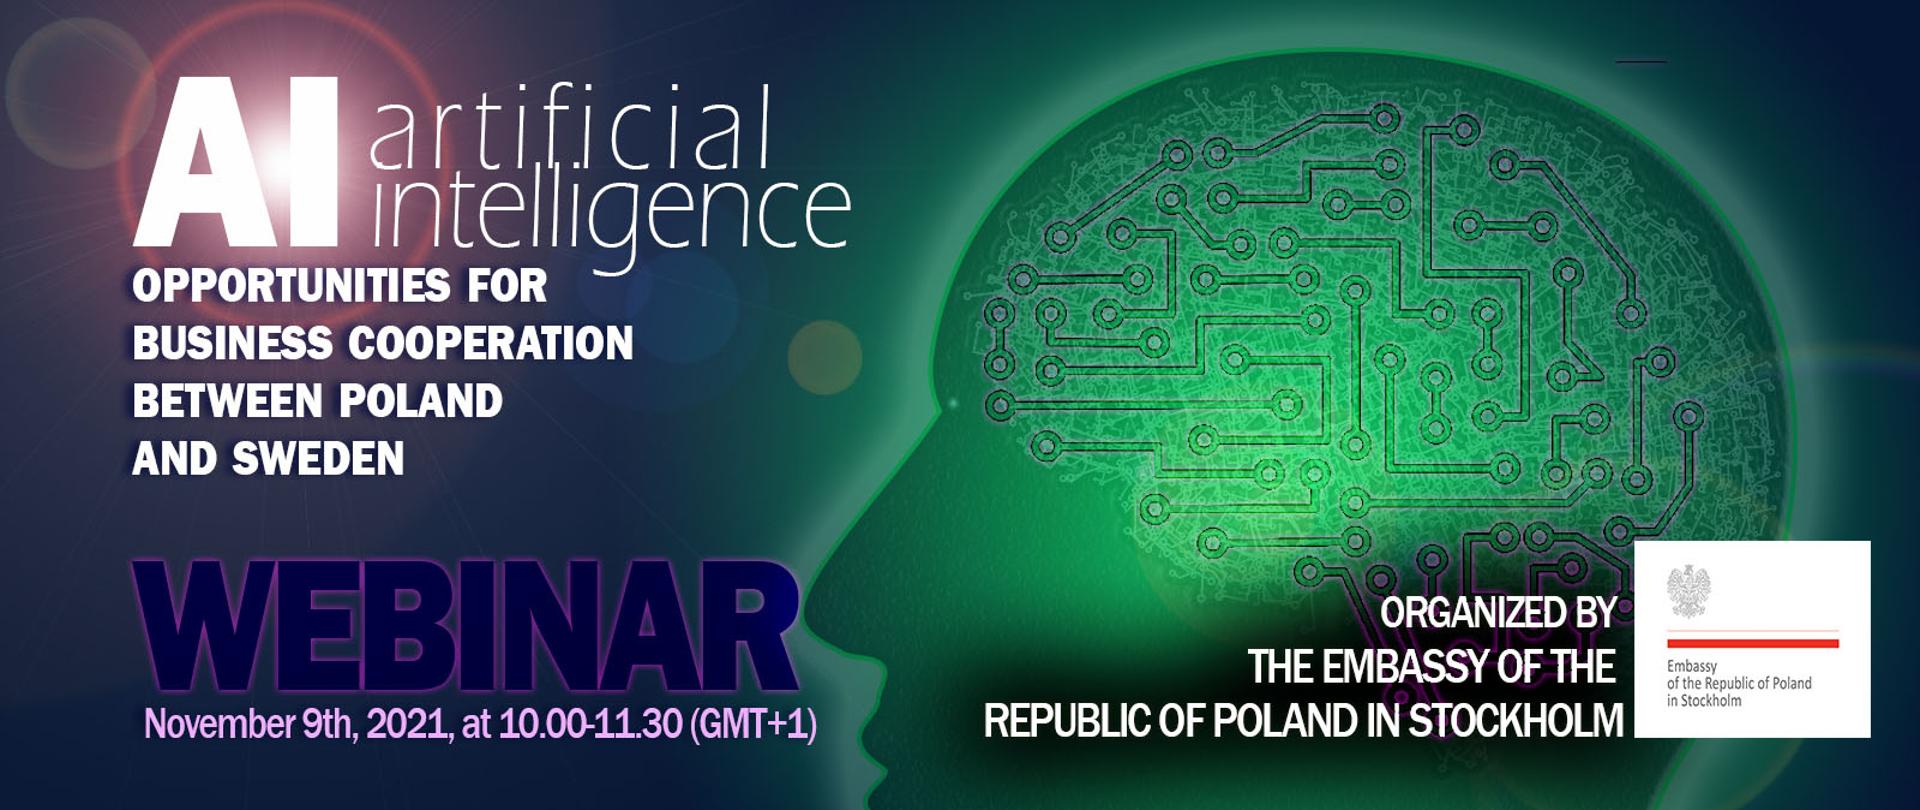 Artificial Intelligence: opportunities for business cooperation between Poland and Sweden